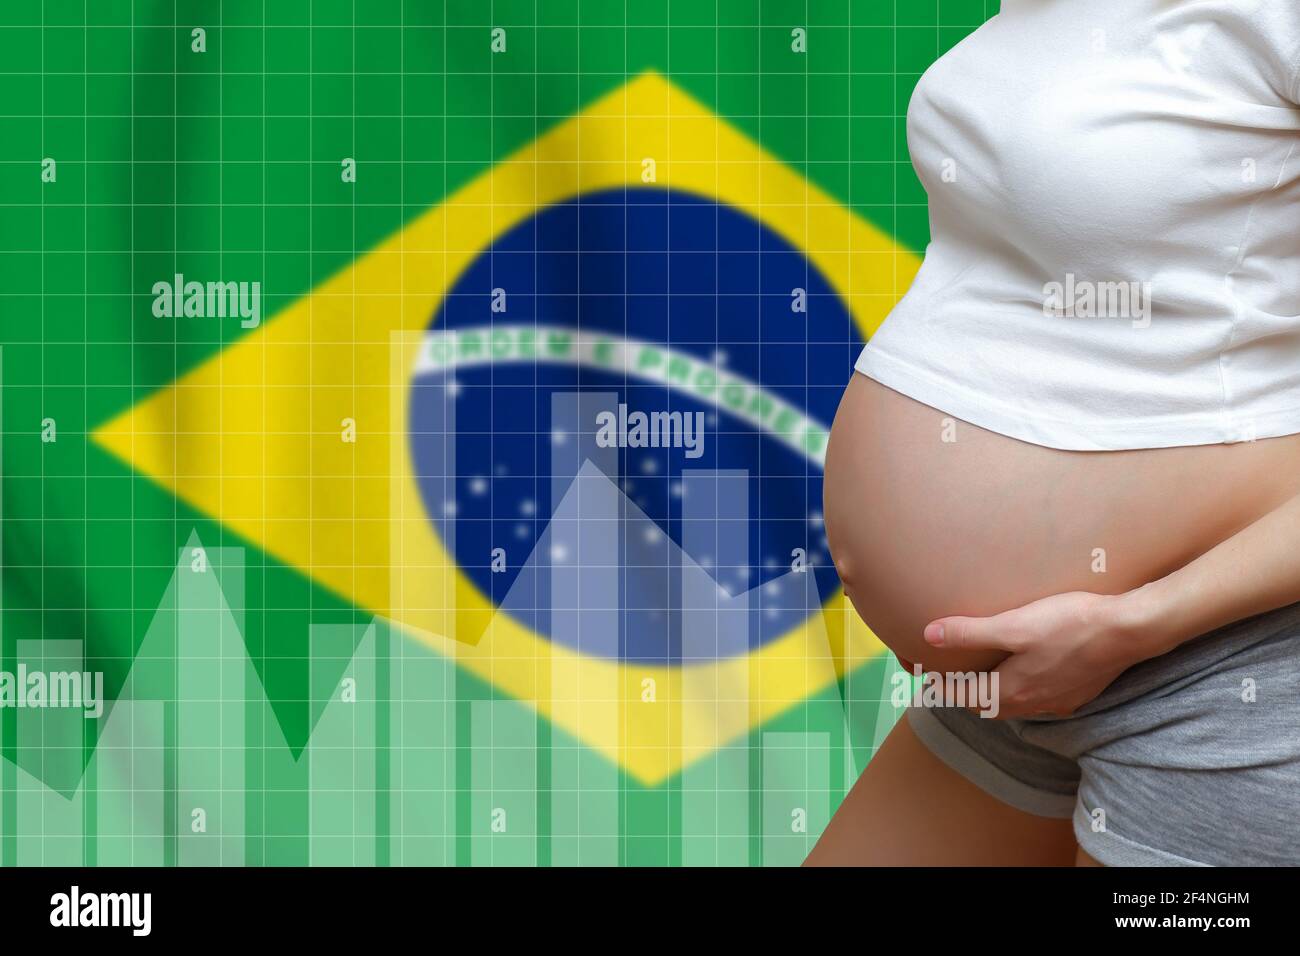 Fertility Concept In The Federative Republic Of Brazil Pregnant Woman On The Background Of The